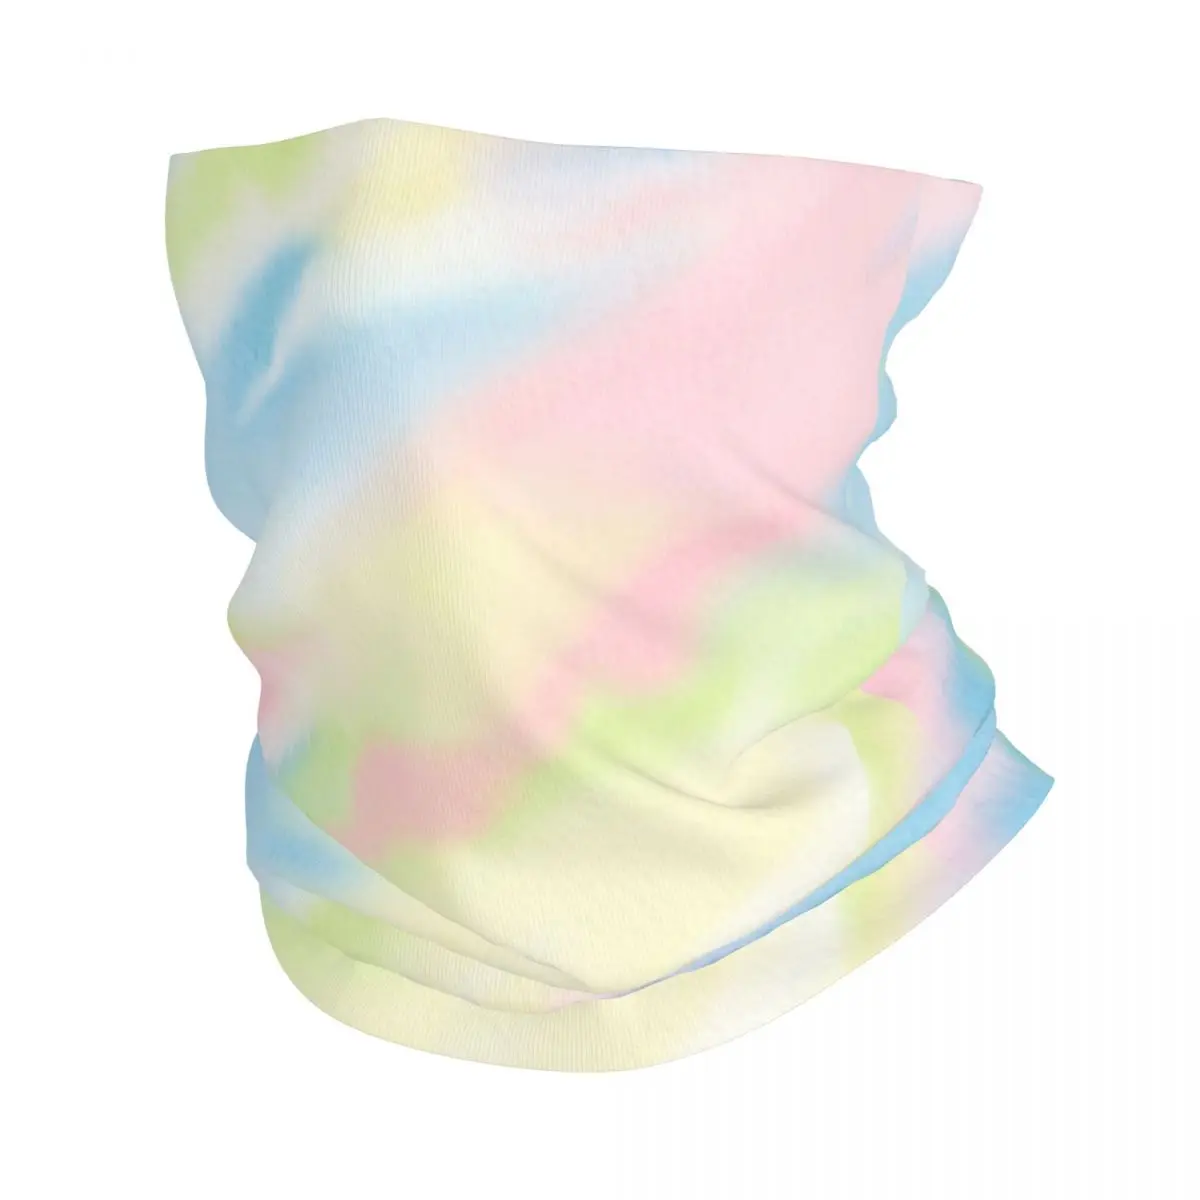 

Watercolor Colorful Bandana Neck Gaiter Printed Balaclavas Face Mask Scarf Multifunctional Cycling Outdoor Sports Unisex Adult